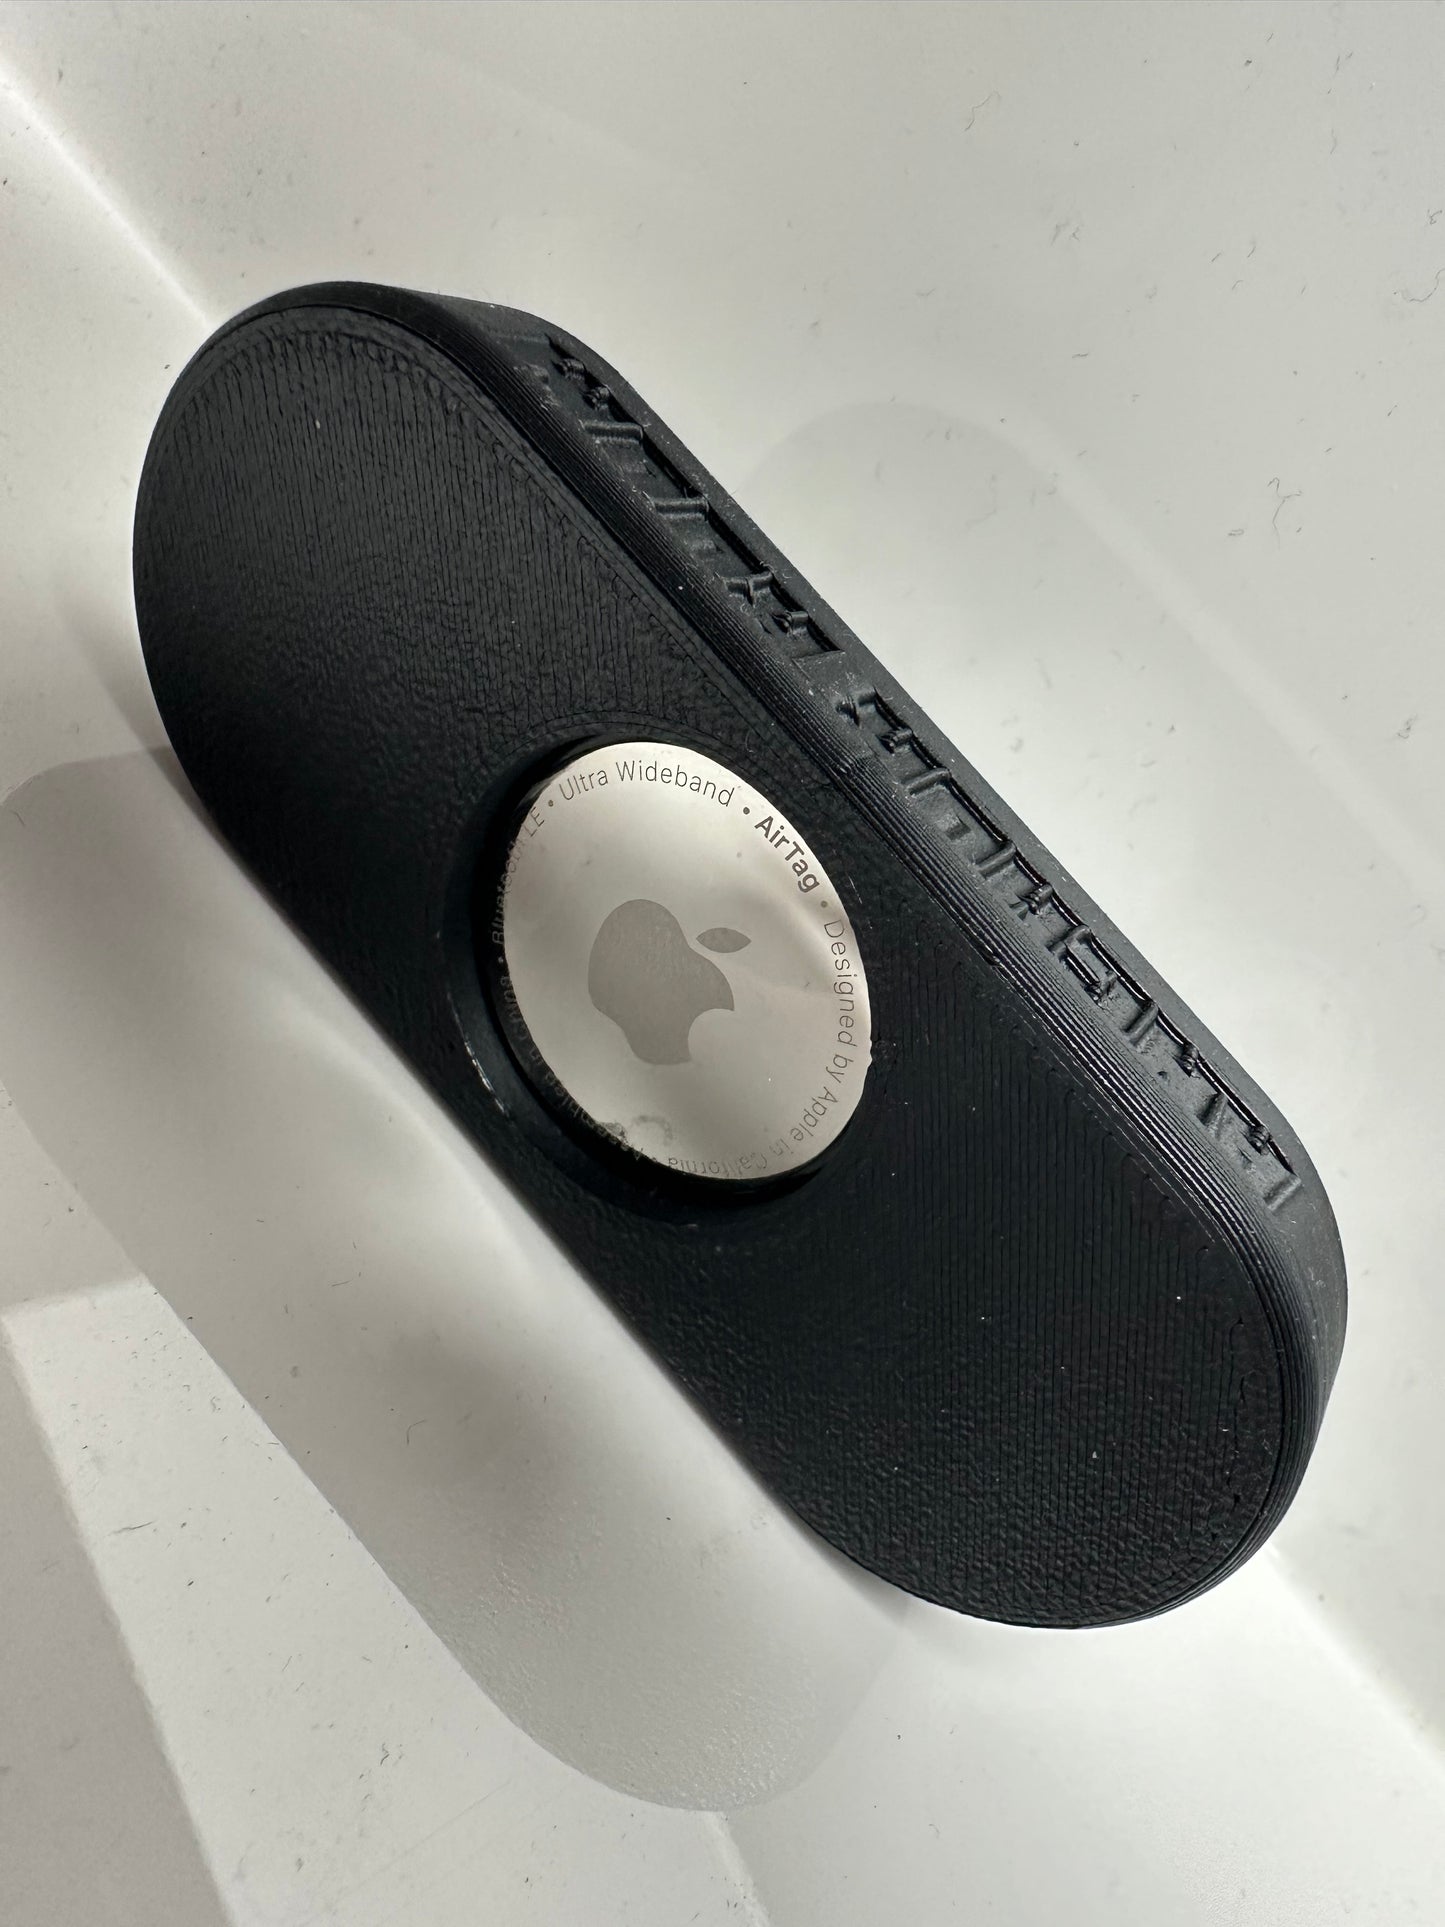 Apple AirTag Stealth Magnet Mount